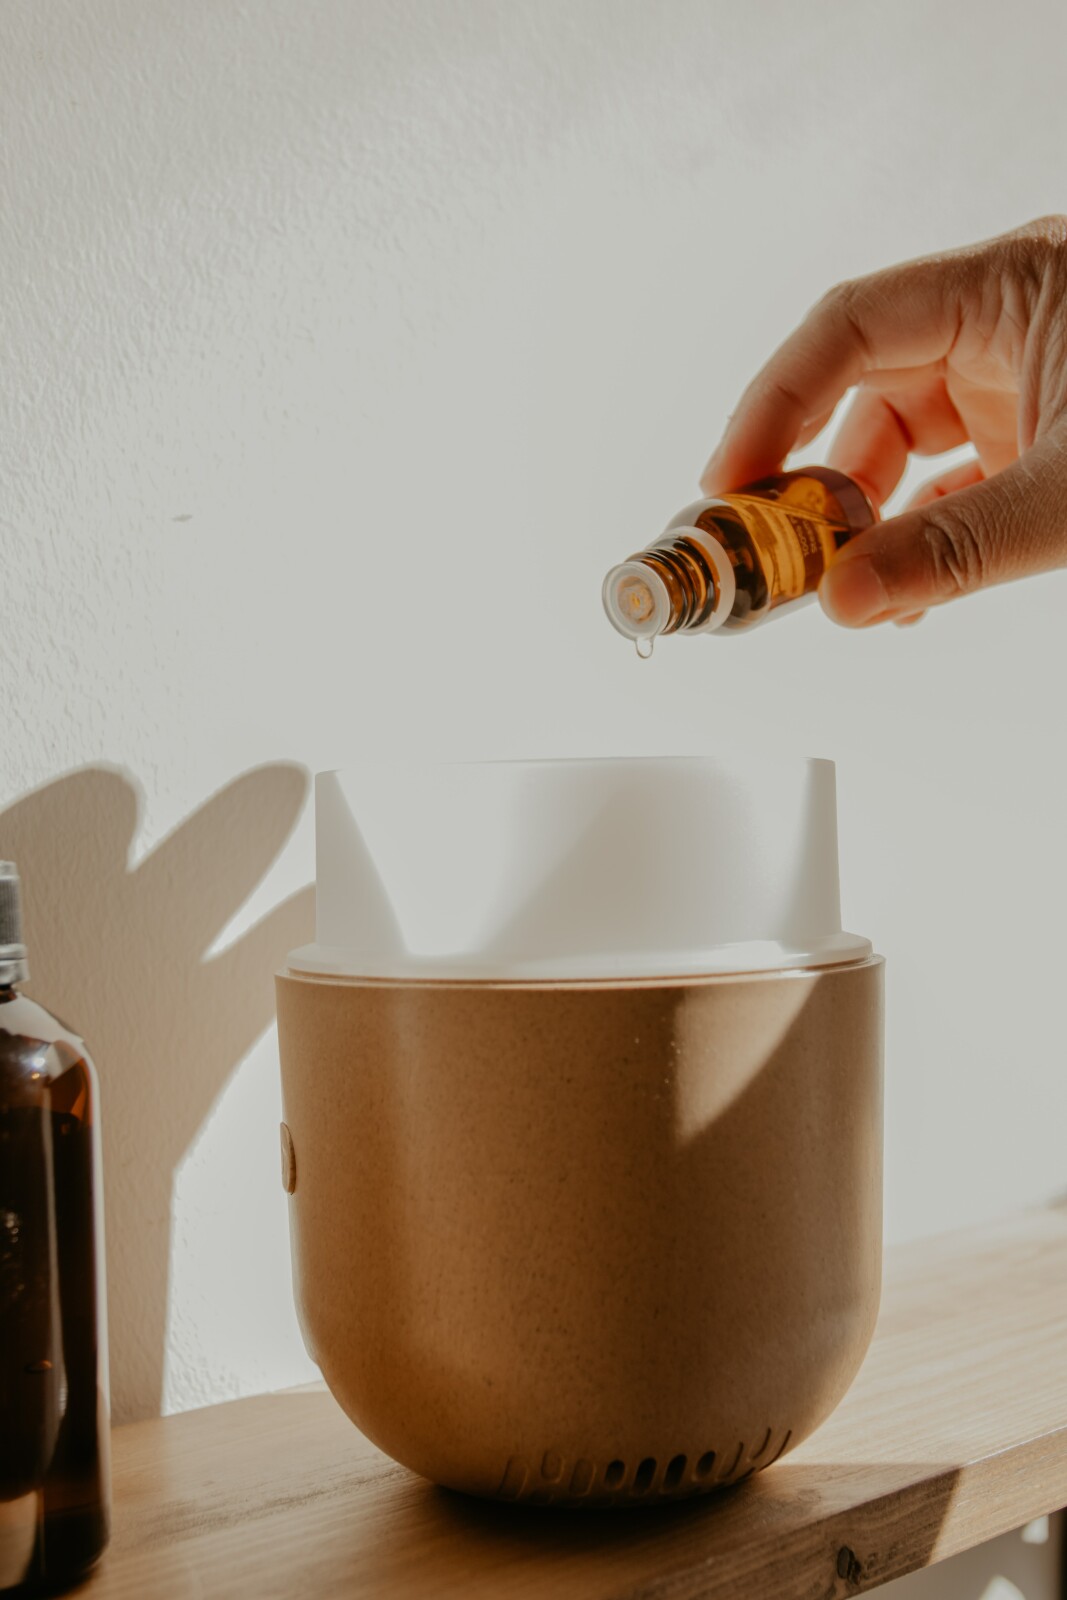 How Using Essential Oils Can Improve Your Anxiety